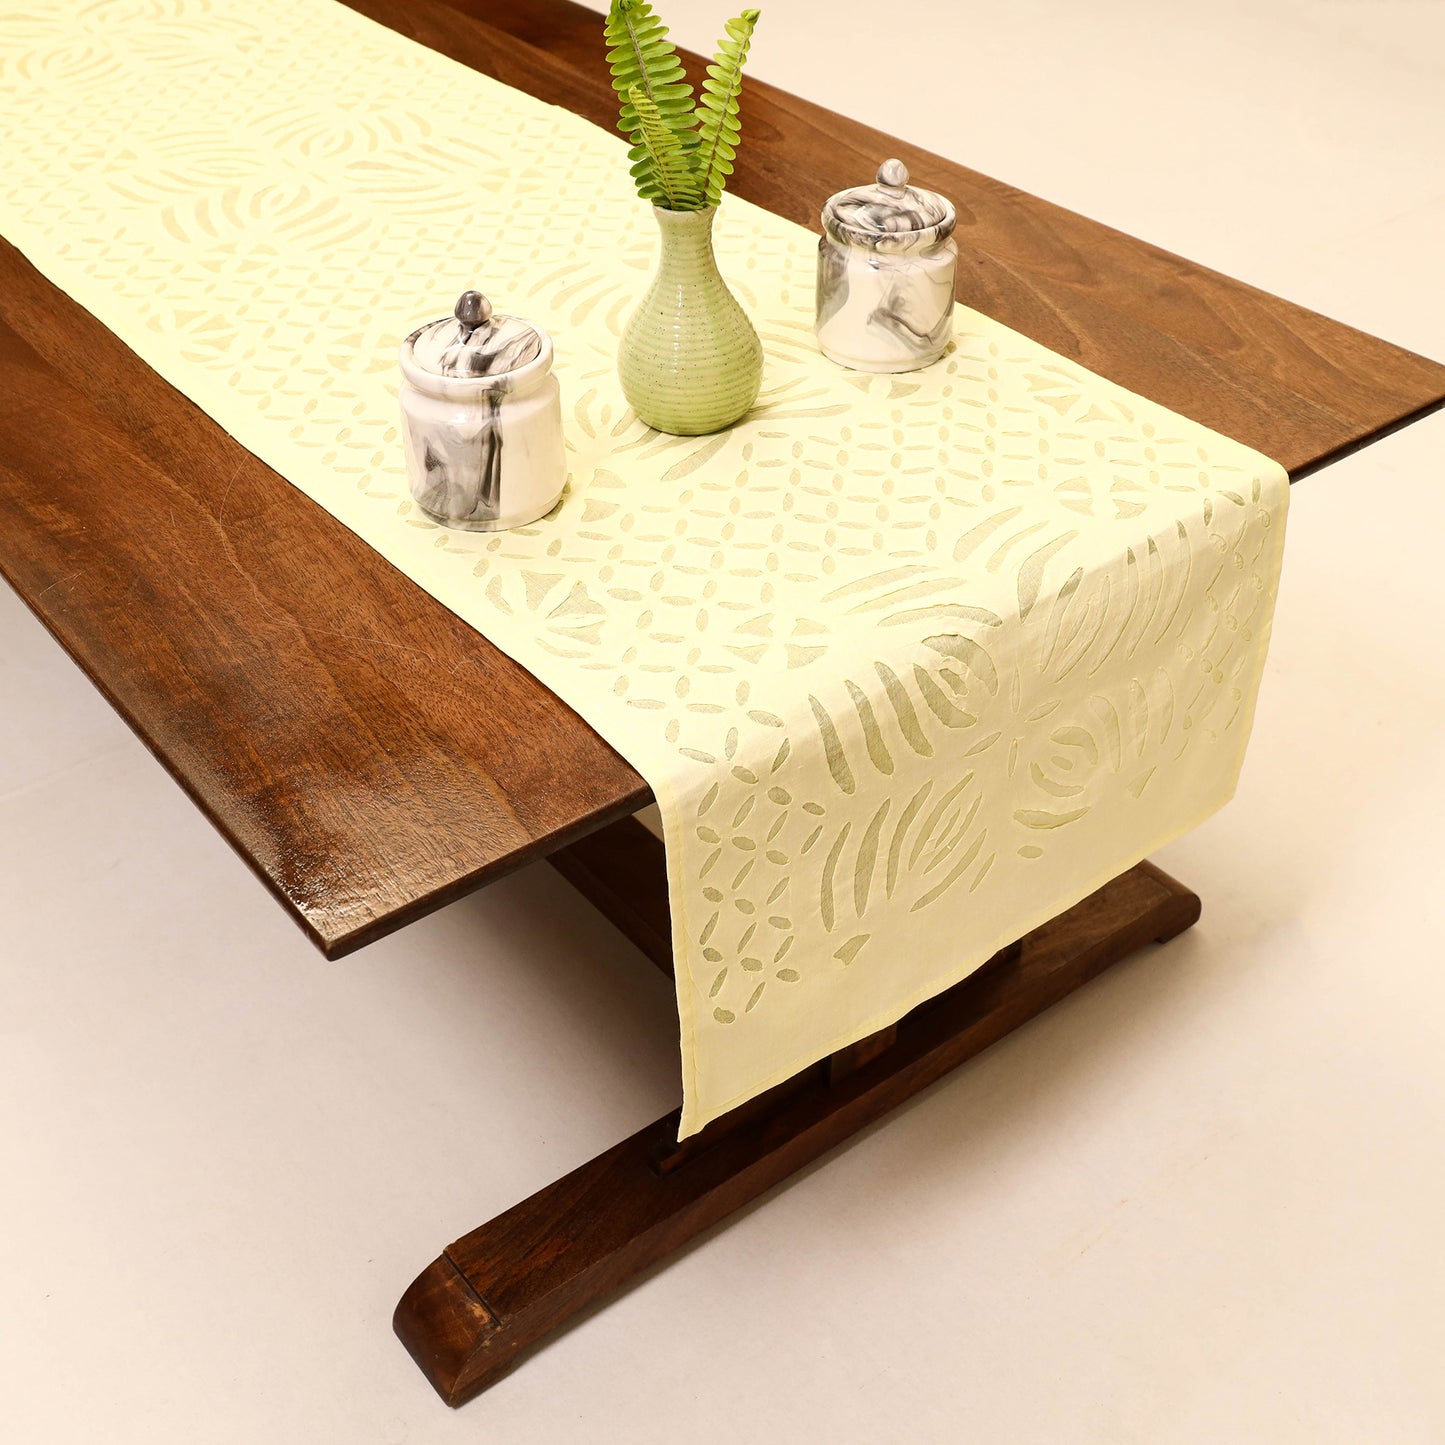 Applique Cut work Cotton Table Runner (73 x 18 in)